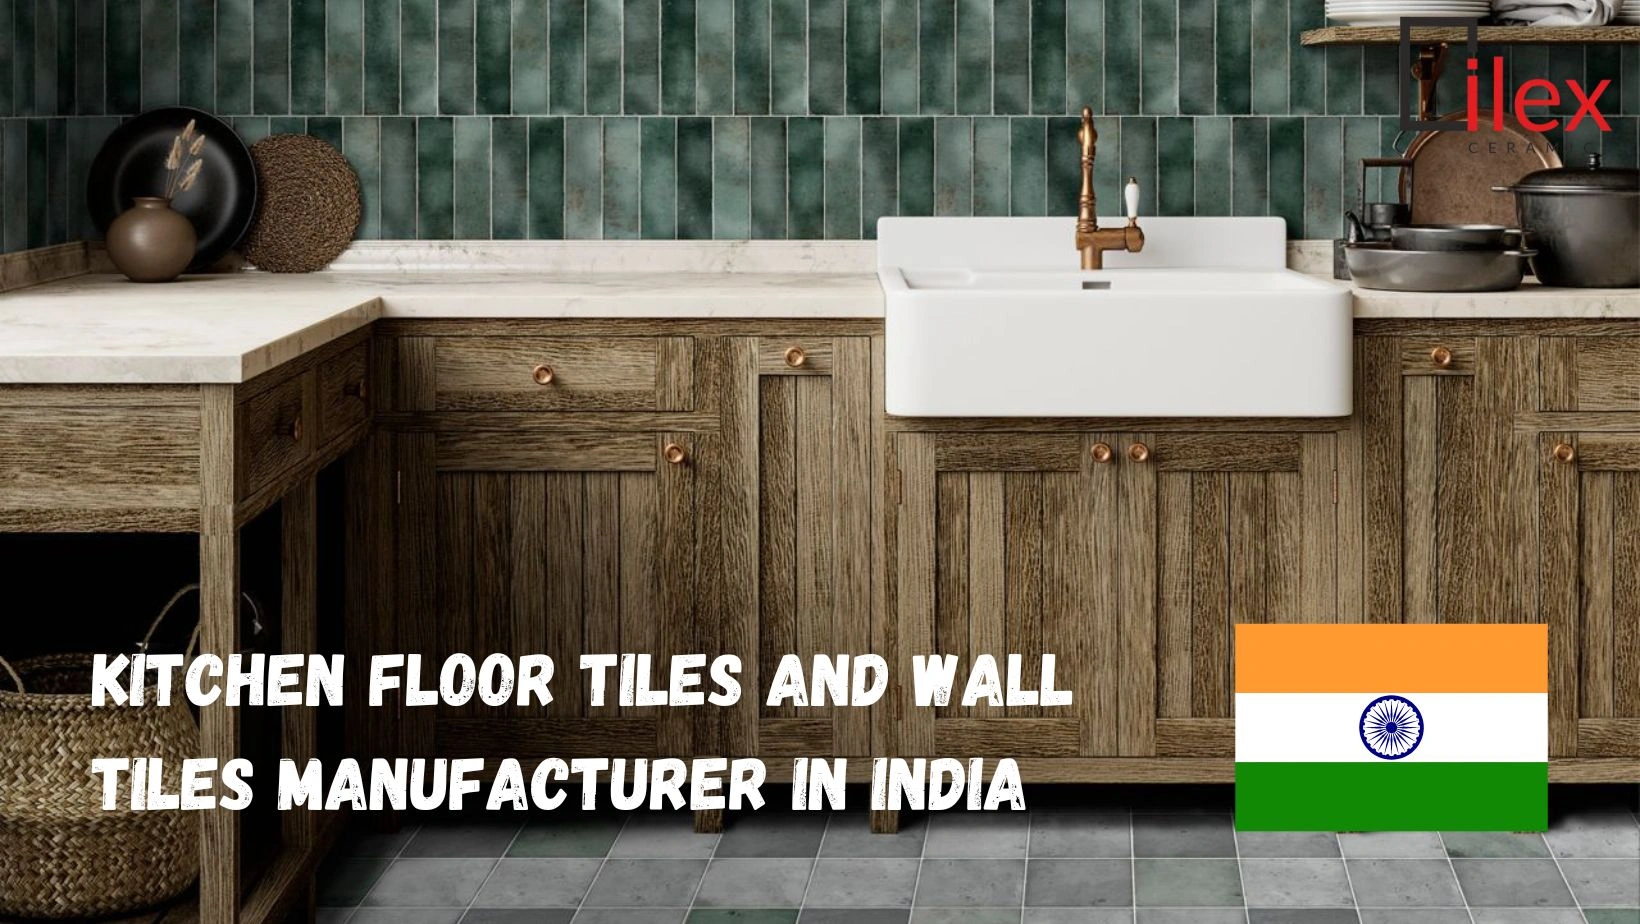 Kitchen Floor Tiles and Wall Tiles Manufacturer in India